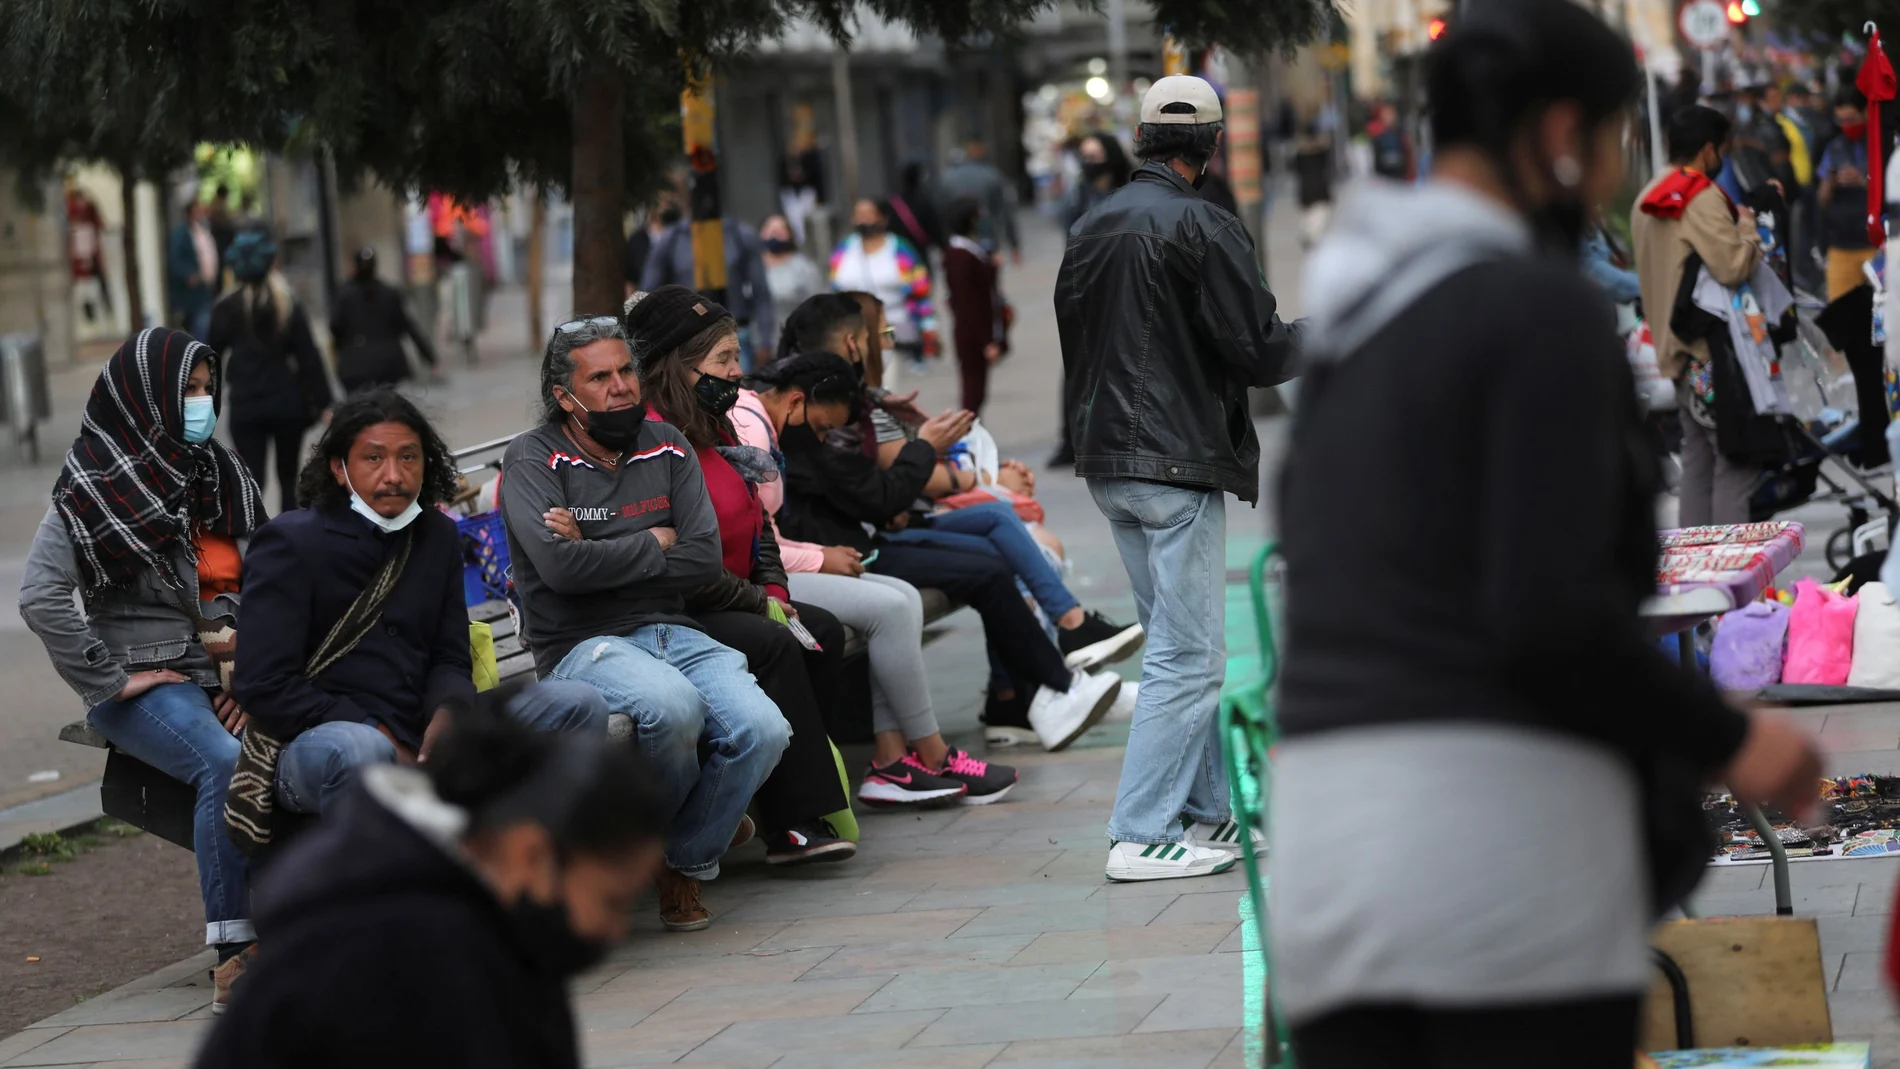 People sit in public spaces without keeping social distance, amidst the coronavirus disease (COVID-19) outbreak, in Bogota, Colombia October 23, 2020. Picture taken October 23, 2020. REUTERS/Luisa Gonzalez